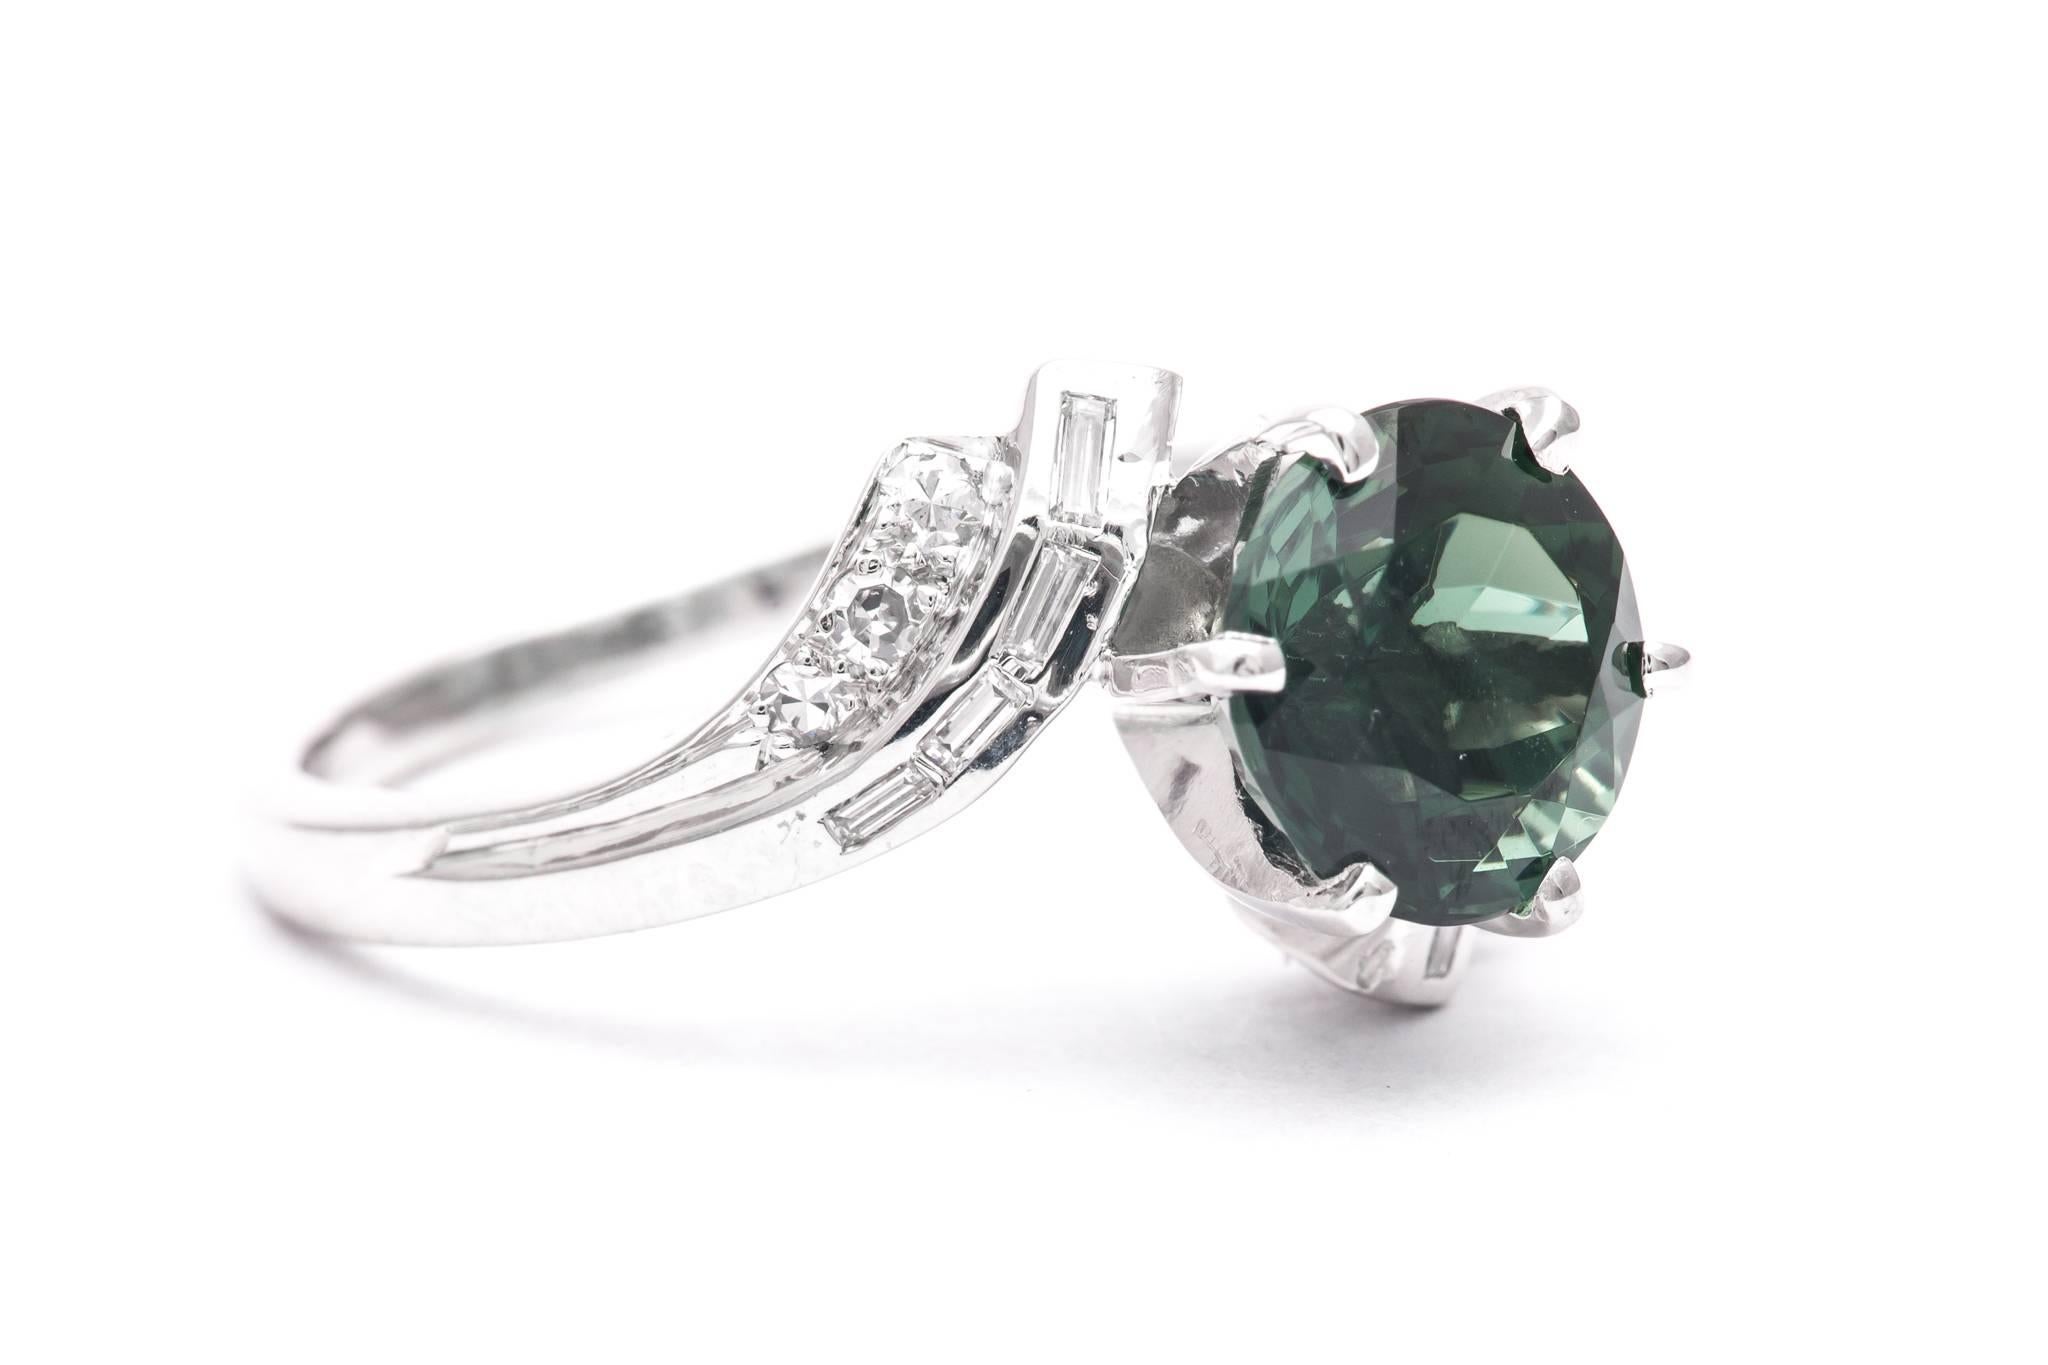 A mid century retro style tourmaline, and diamond ring set in luxurious platinum.  Centered by a beautiful gem quality 2.60 carat European cut tourmaline this ring features accenting baguette and Swiss cut diamonds in platinum.

Grading as beautiful